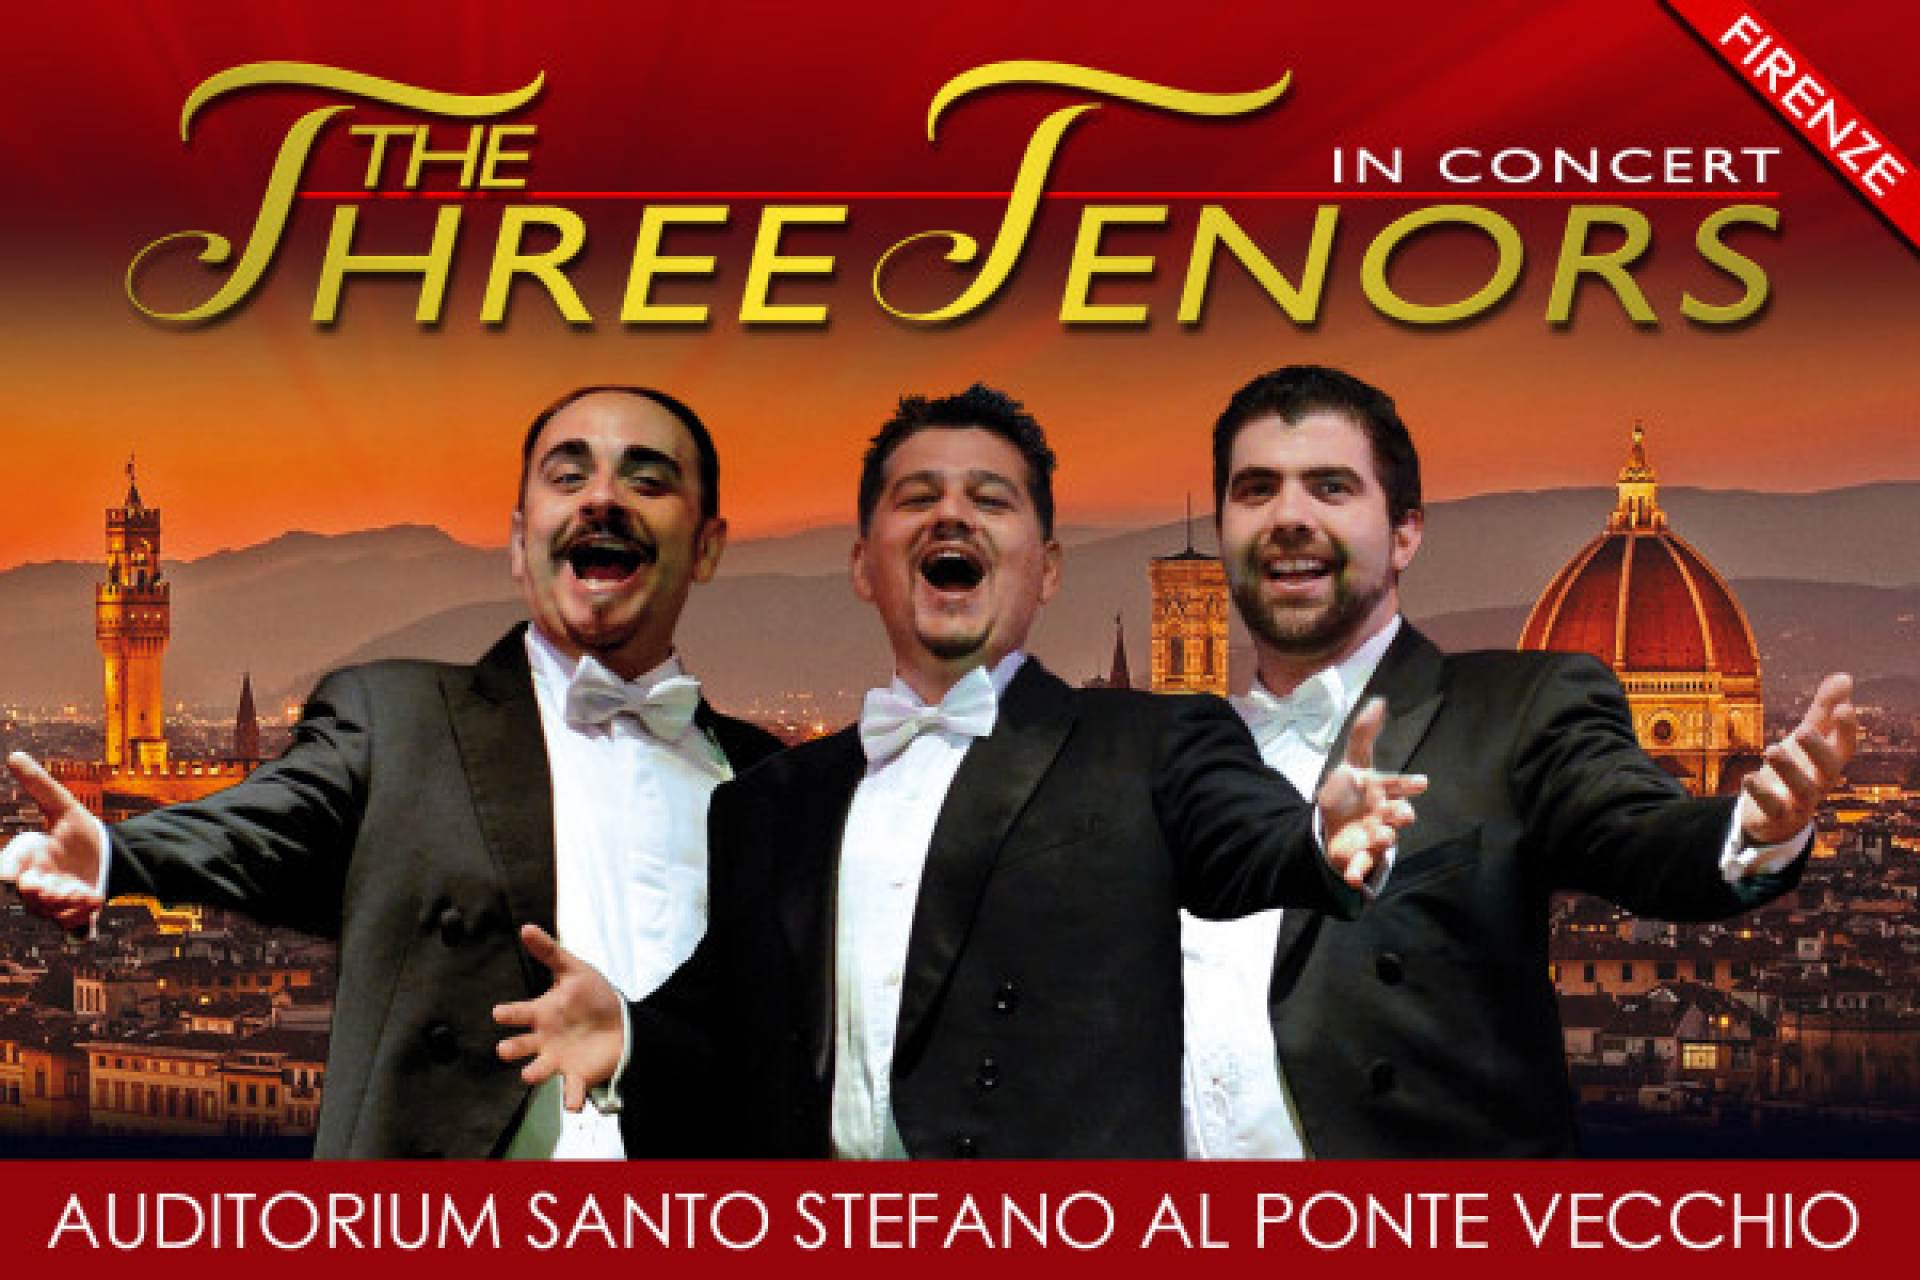 The Three Tenors In Florence